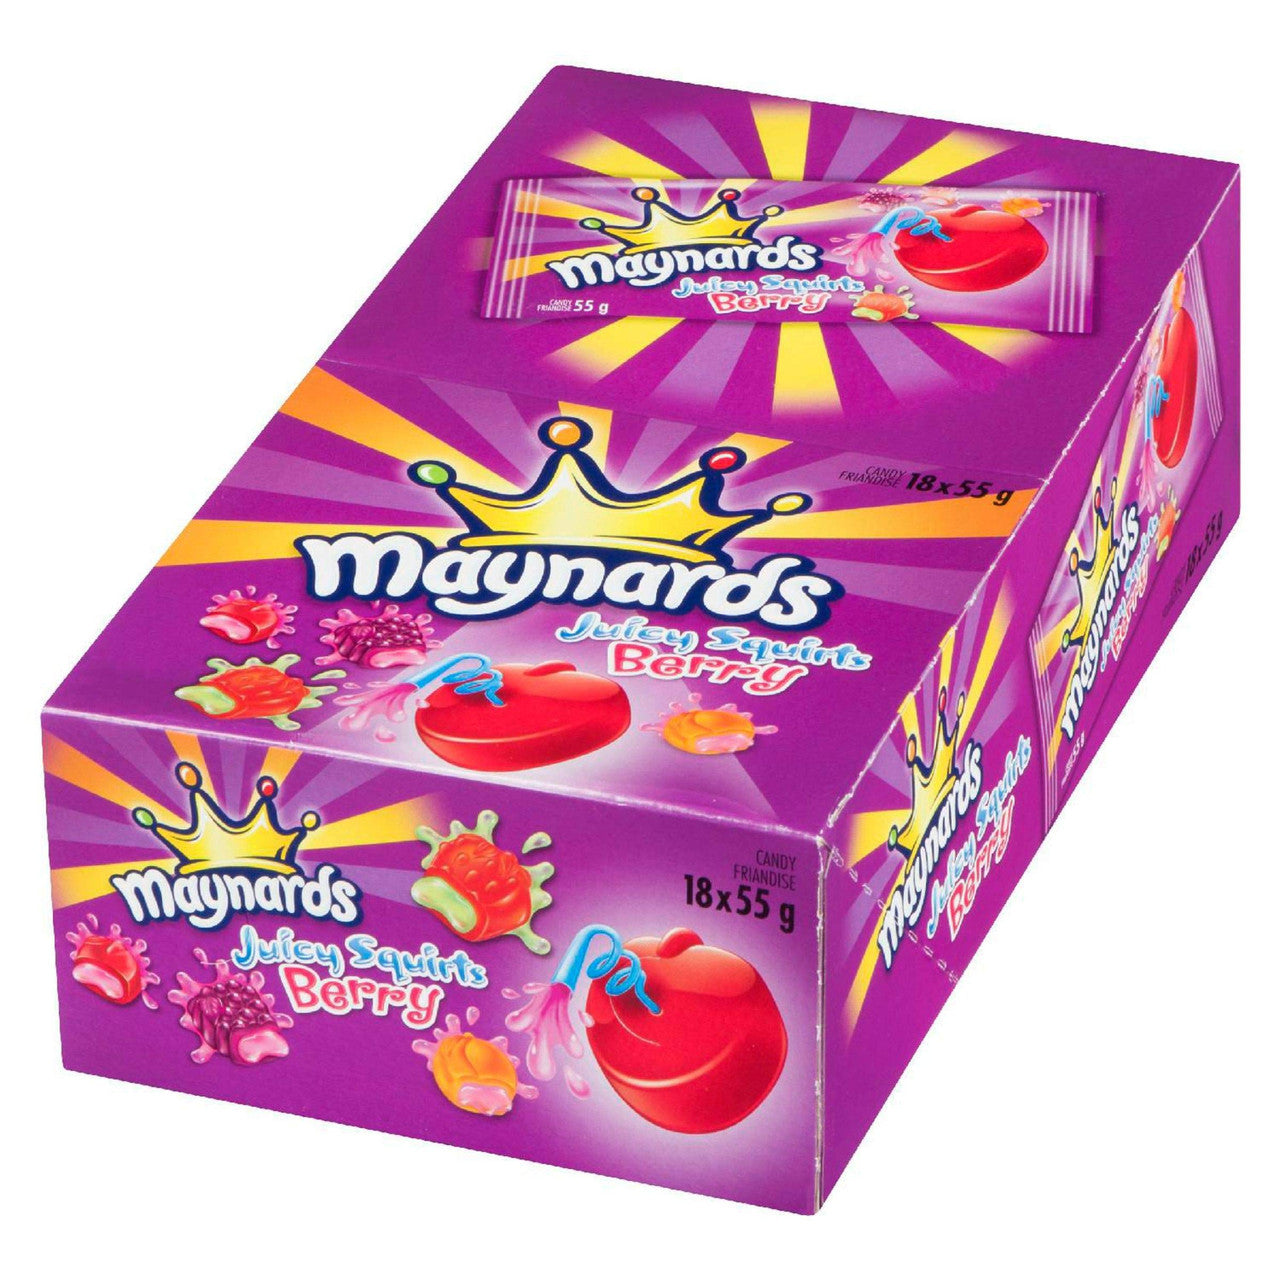 Maynards Juicy Squirts Berry Gummy Candy, 55g/1.9oz., (Pack of 18) {Imported from Canada}